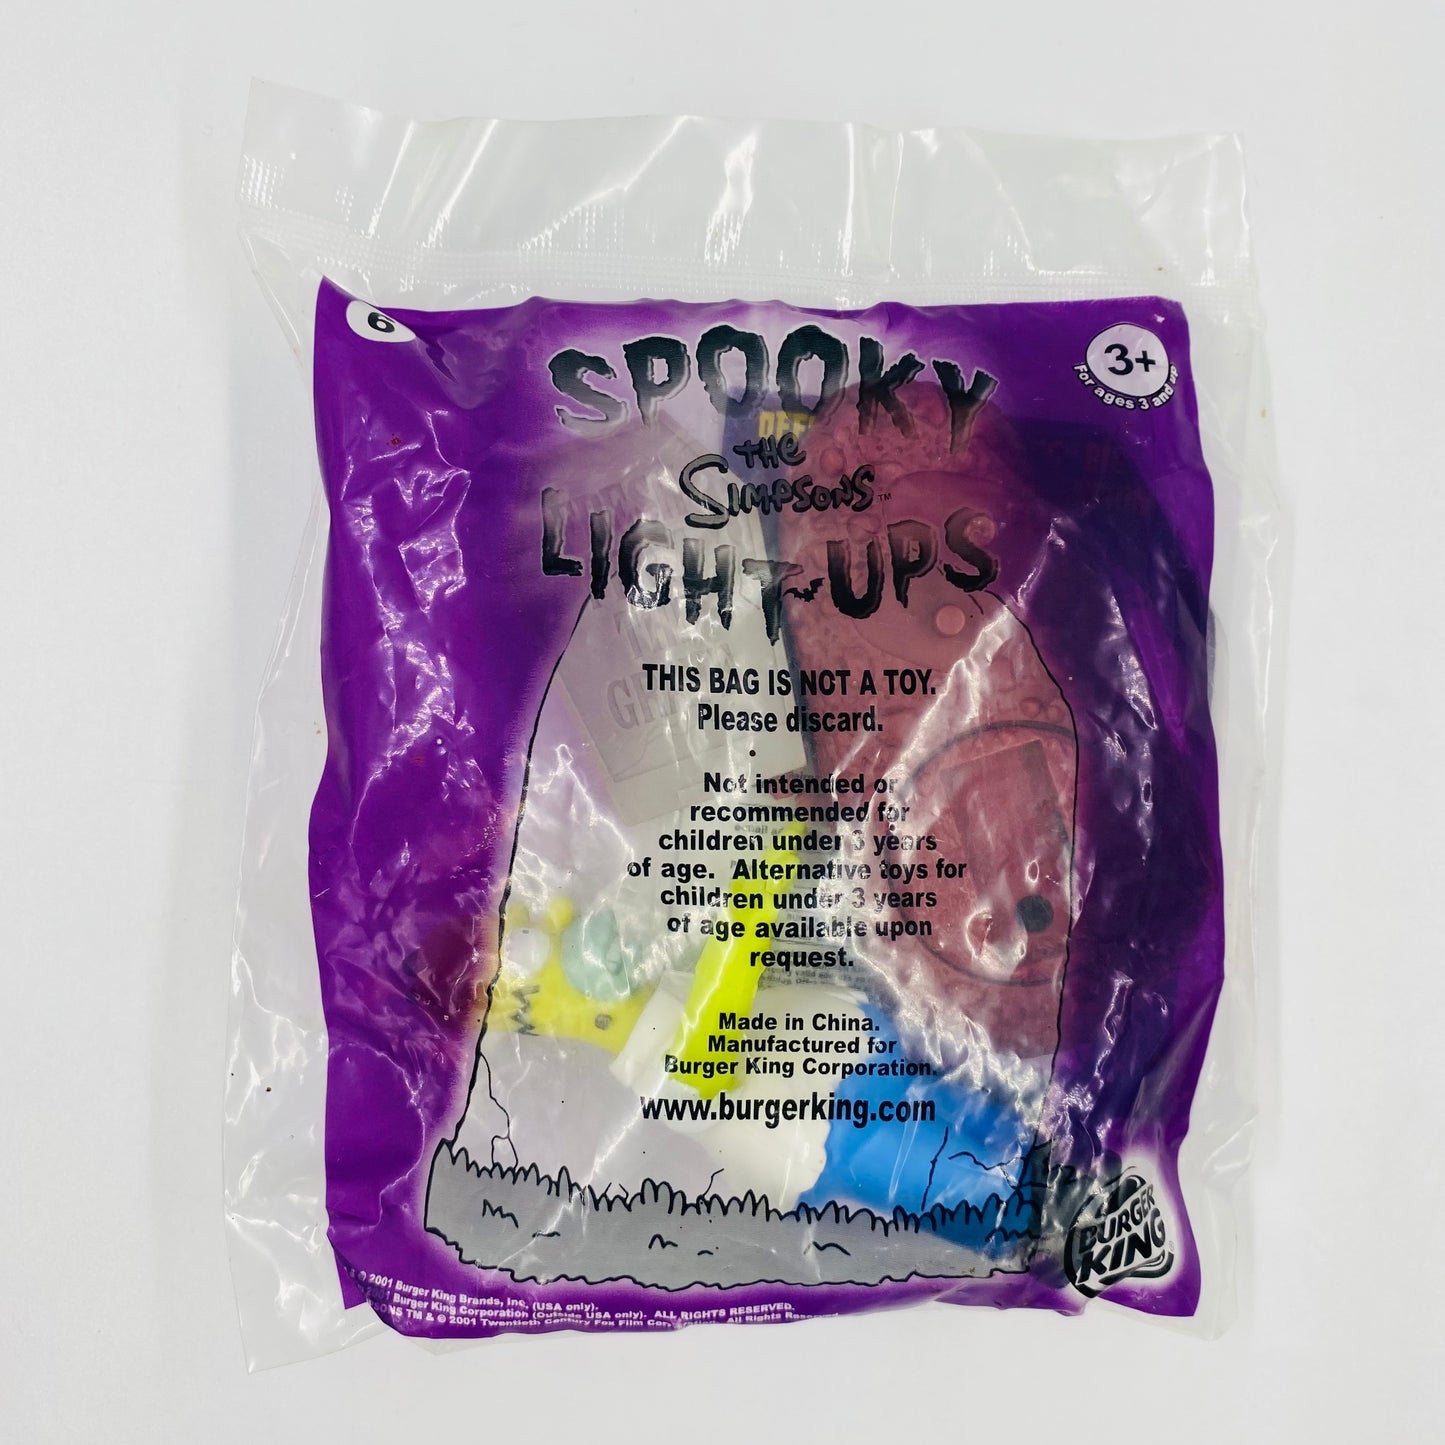 The Simpsons Spooky Light-Ups Homer Simpson Burger King Kids' Meals toy (2001) bagged